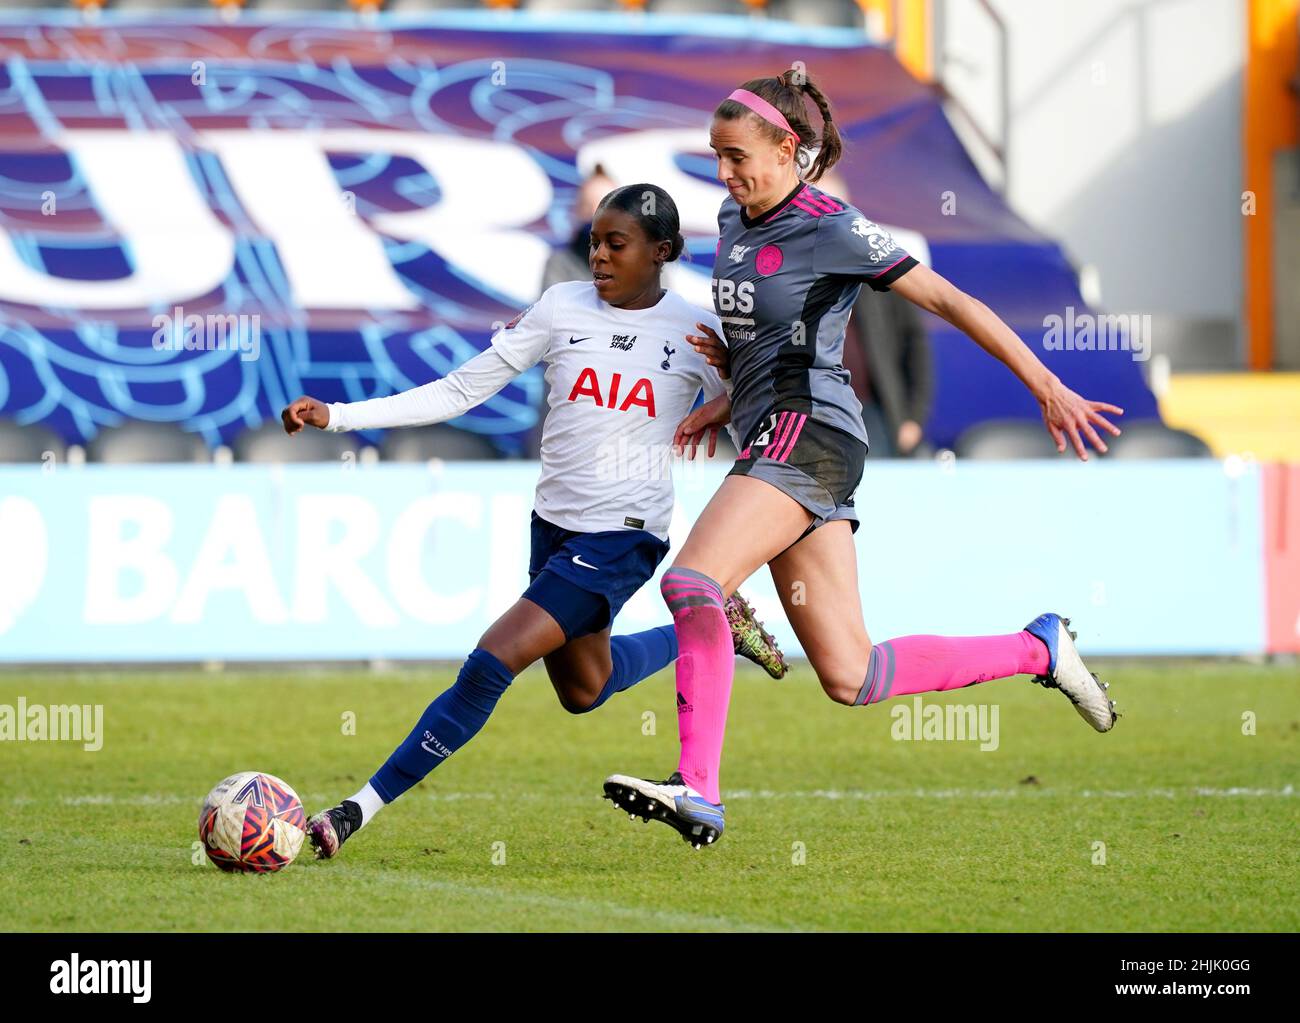 Tottenham Hotspur's Jessica Naz (left) and Leicester City's Ashleigh Plumptre battle for the ball during the Vitality Women's FA Cup fourth round match at The Hive, London. Picture date: Sunday January 30, 2022. Stock Photo